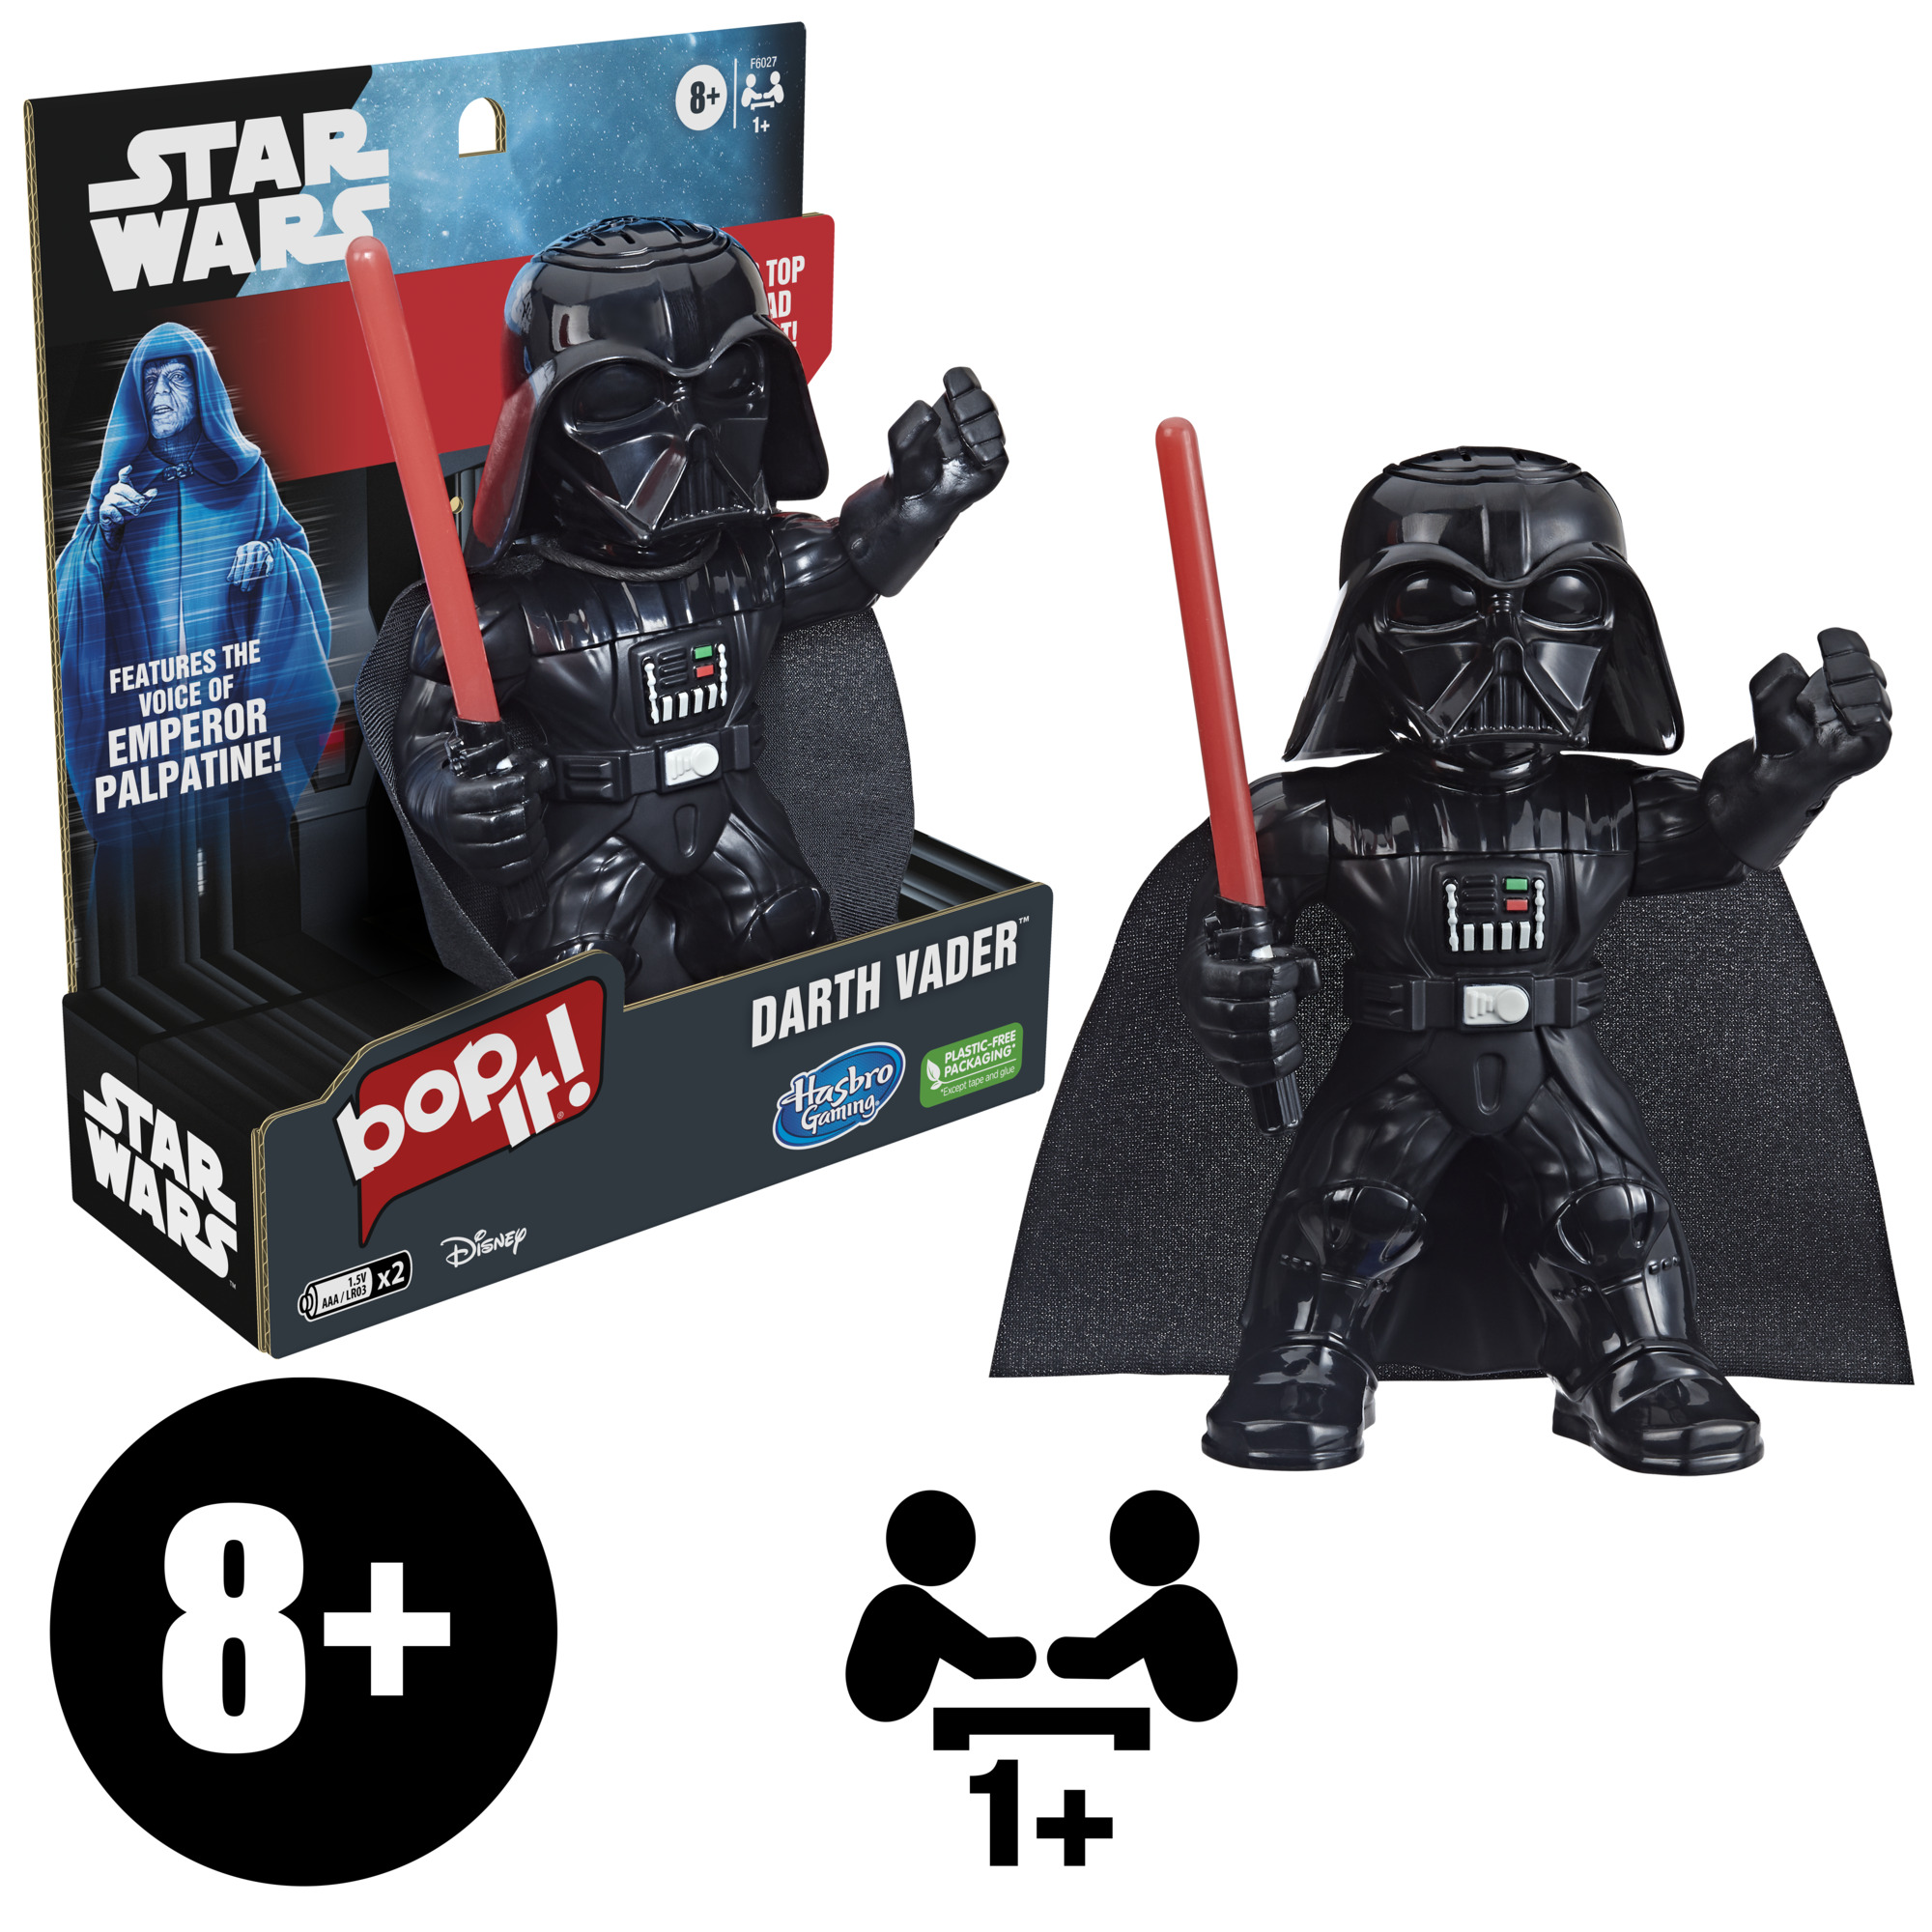 Bop It! Star Wars Darth Vader Edition Game, Features the Voice of Emperor Palpatine, Ages 8 and Up, Only At Walmart - image 3 of 5